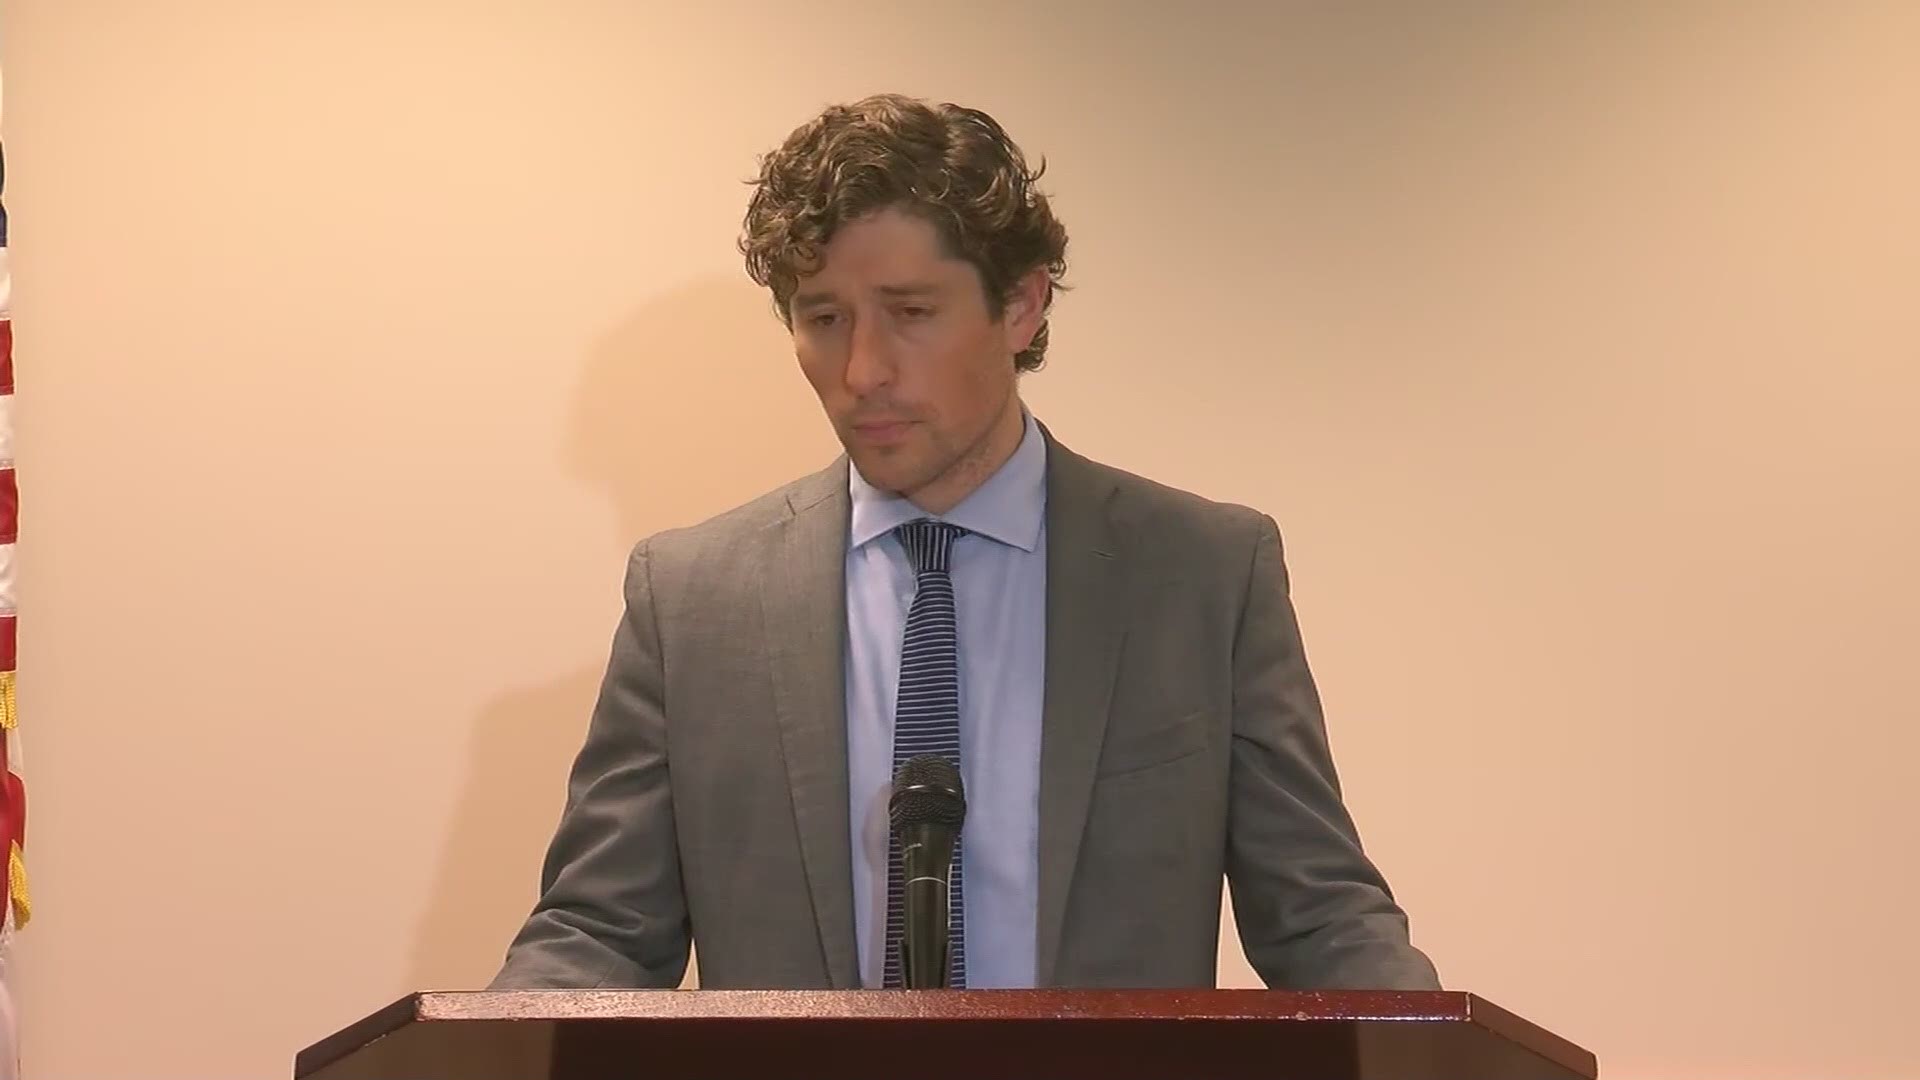 Minneapolis Mayor Jacob Frey is apologizing to the community for an incident involving an officer seen on tape kneeling on the neck of a suspect. That man later died